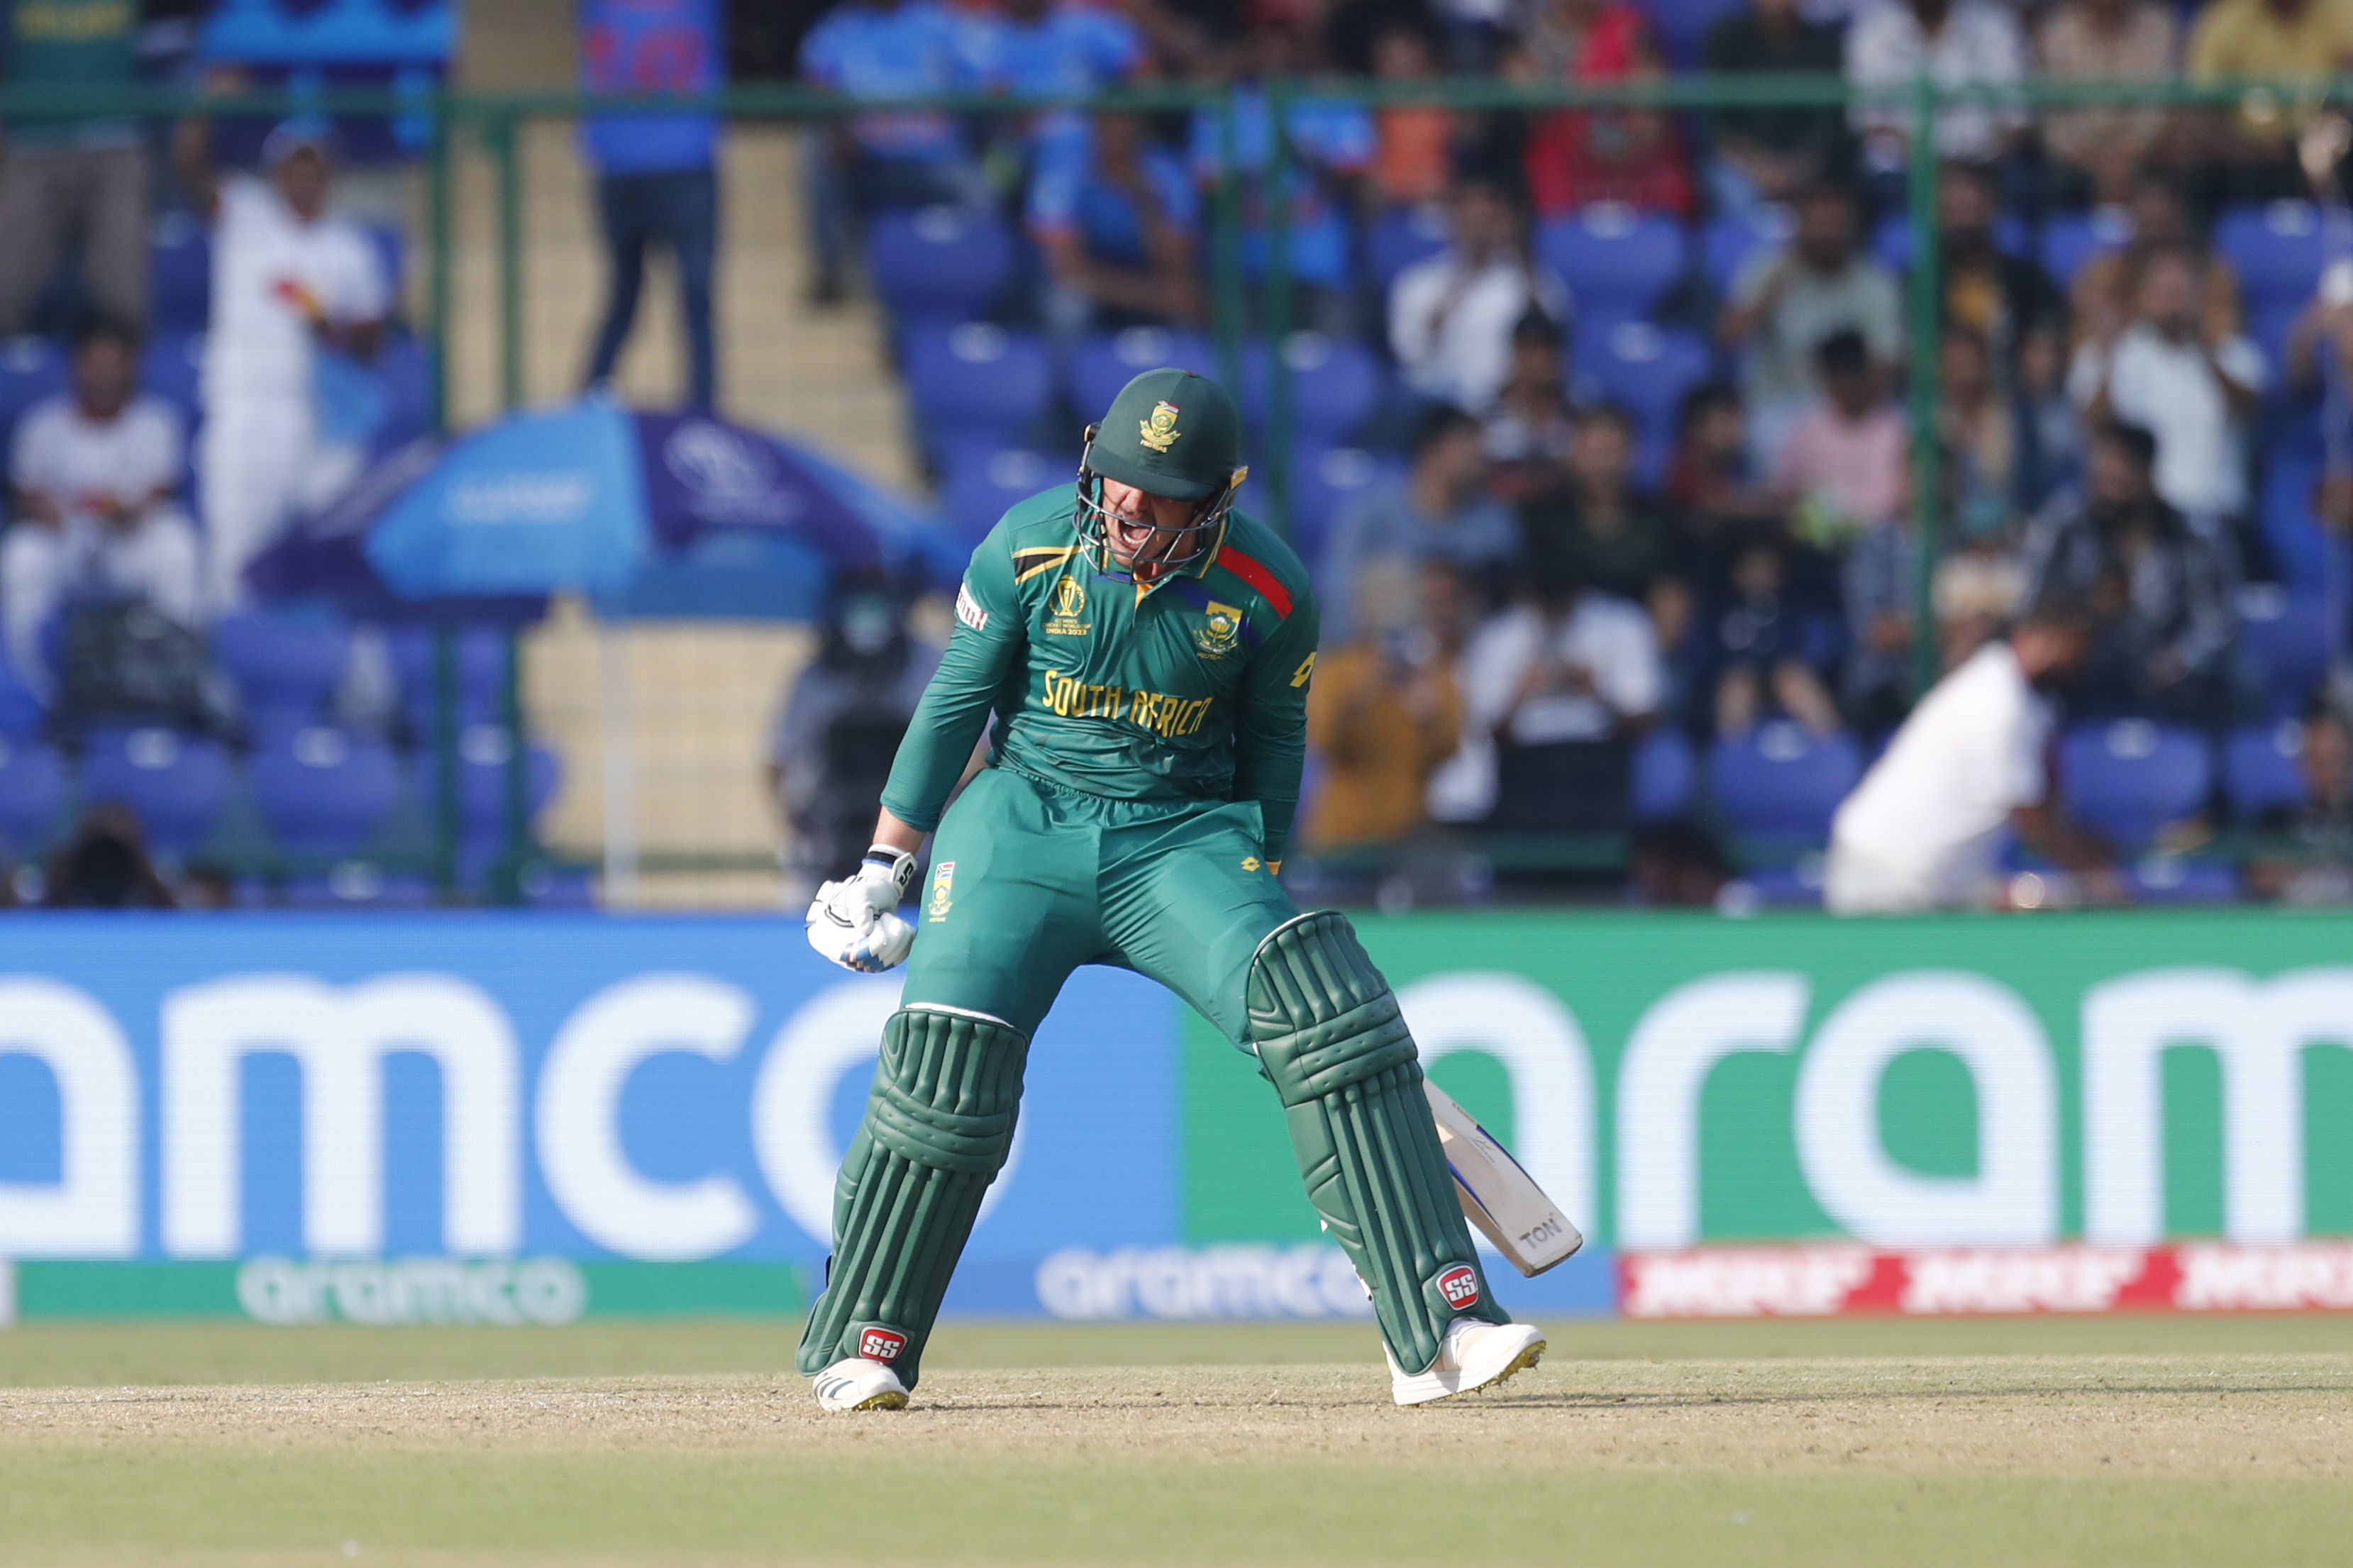 SA's batters give a sterling performance at World Cup.